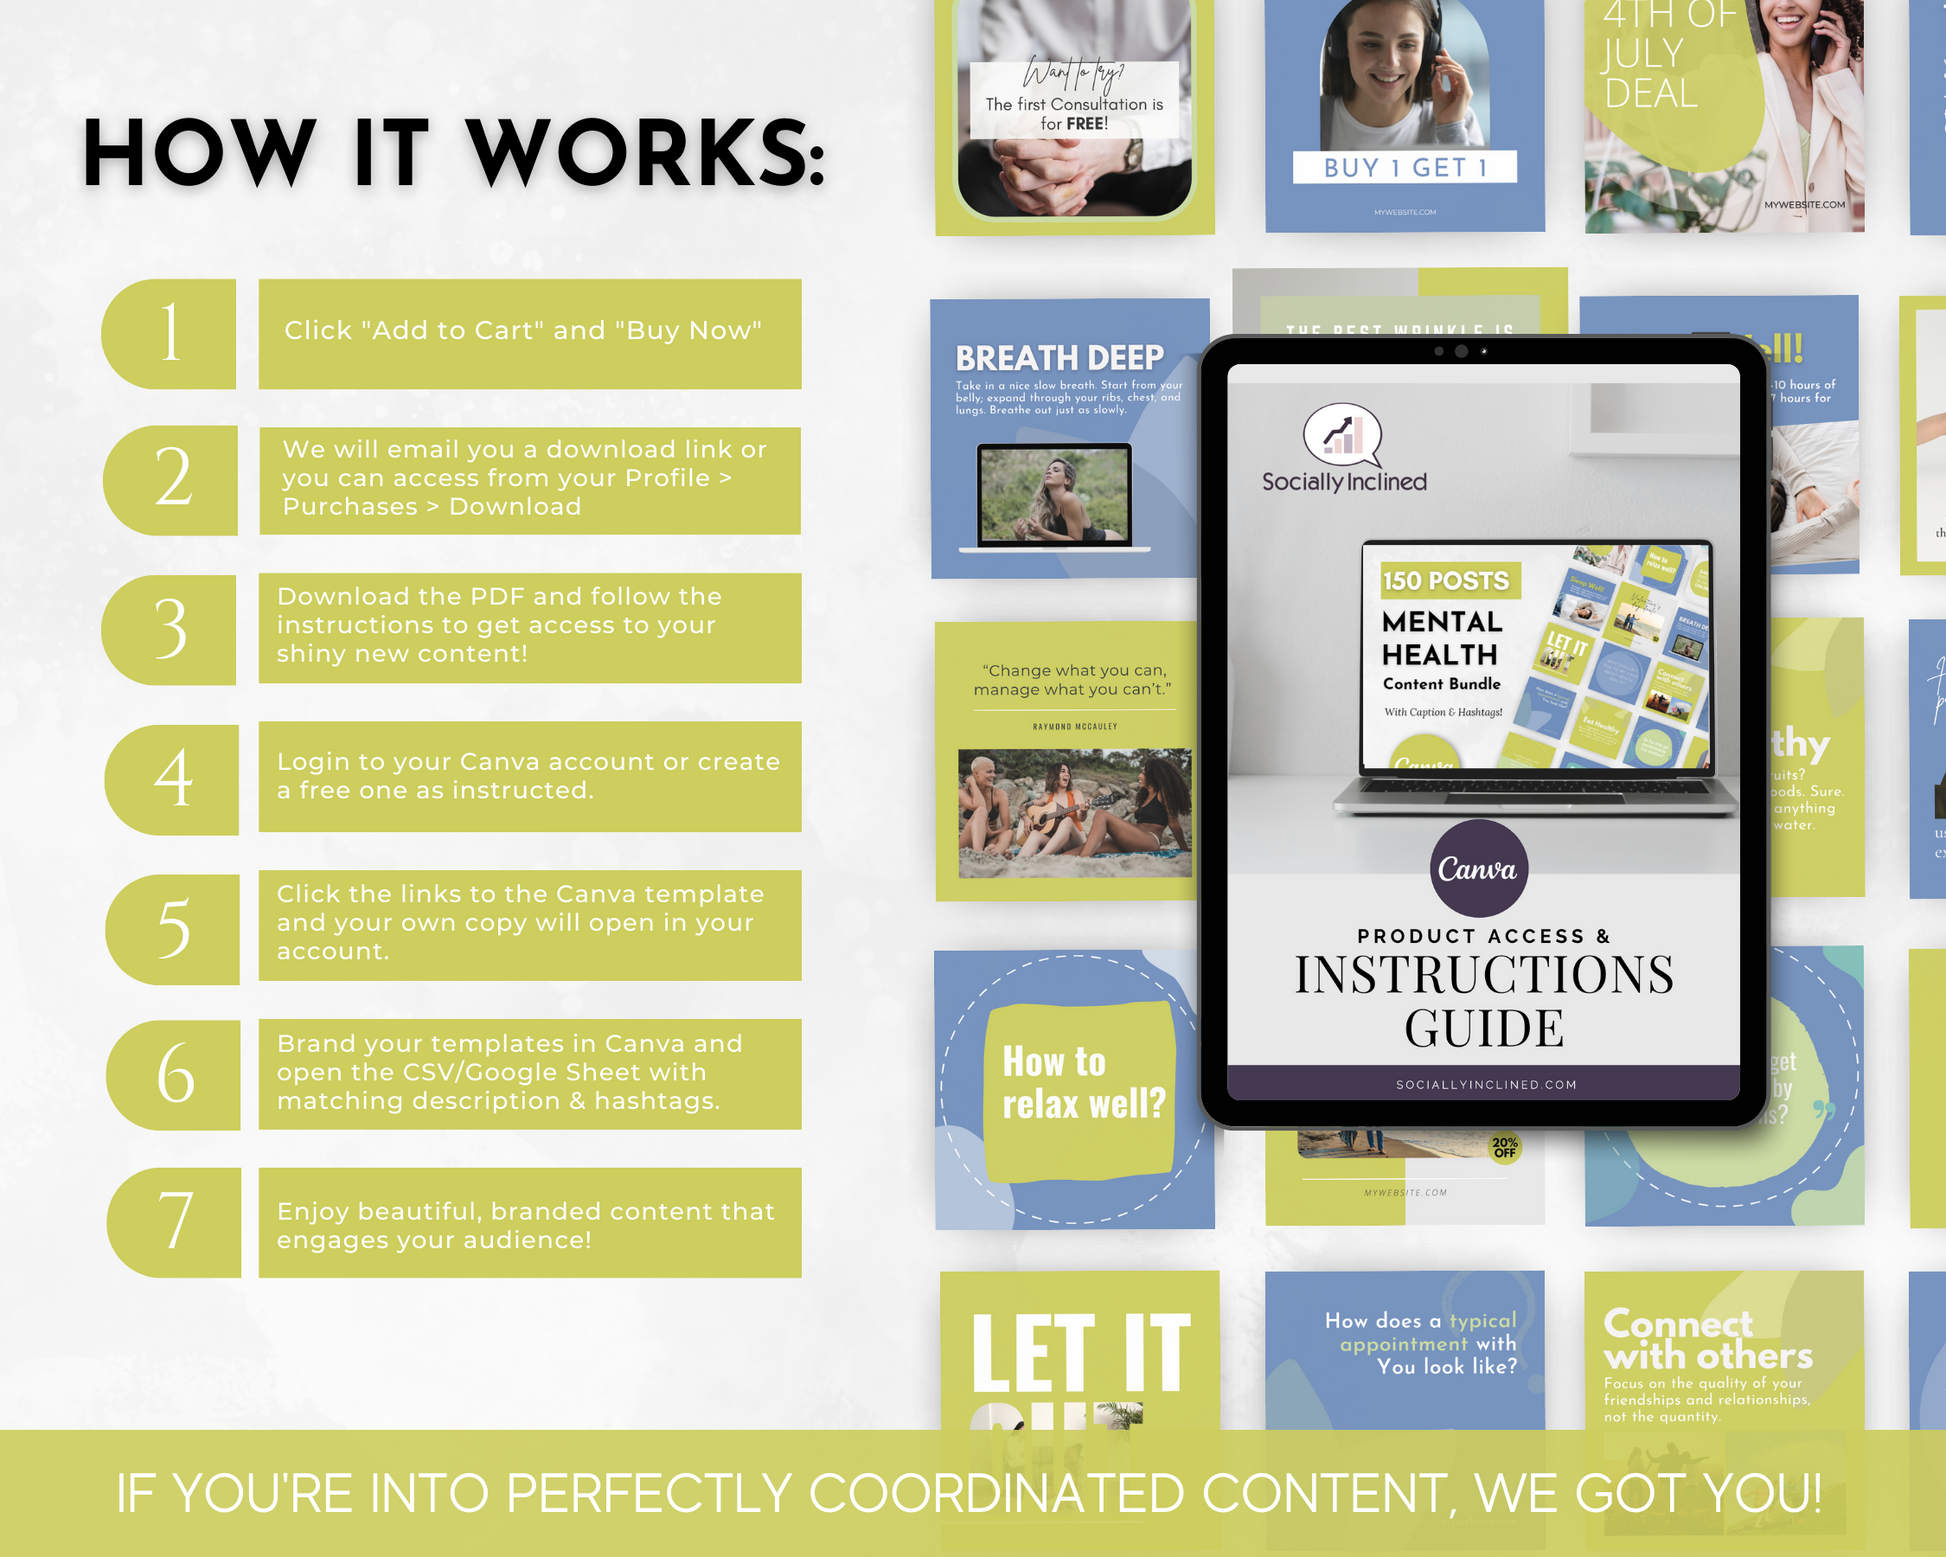 How it works instruction guide for professionals in the Mental Health field using Social Media with Socially Inclined's Mental Health Social Media Post Bundle featuring Canva Templates.